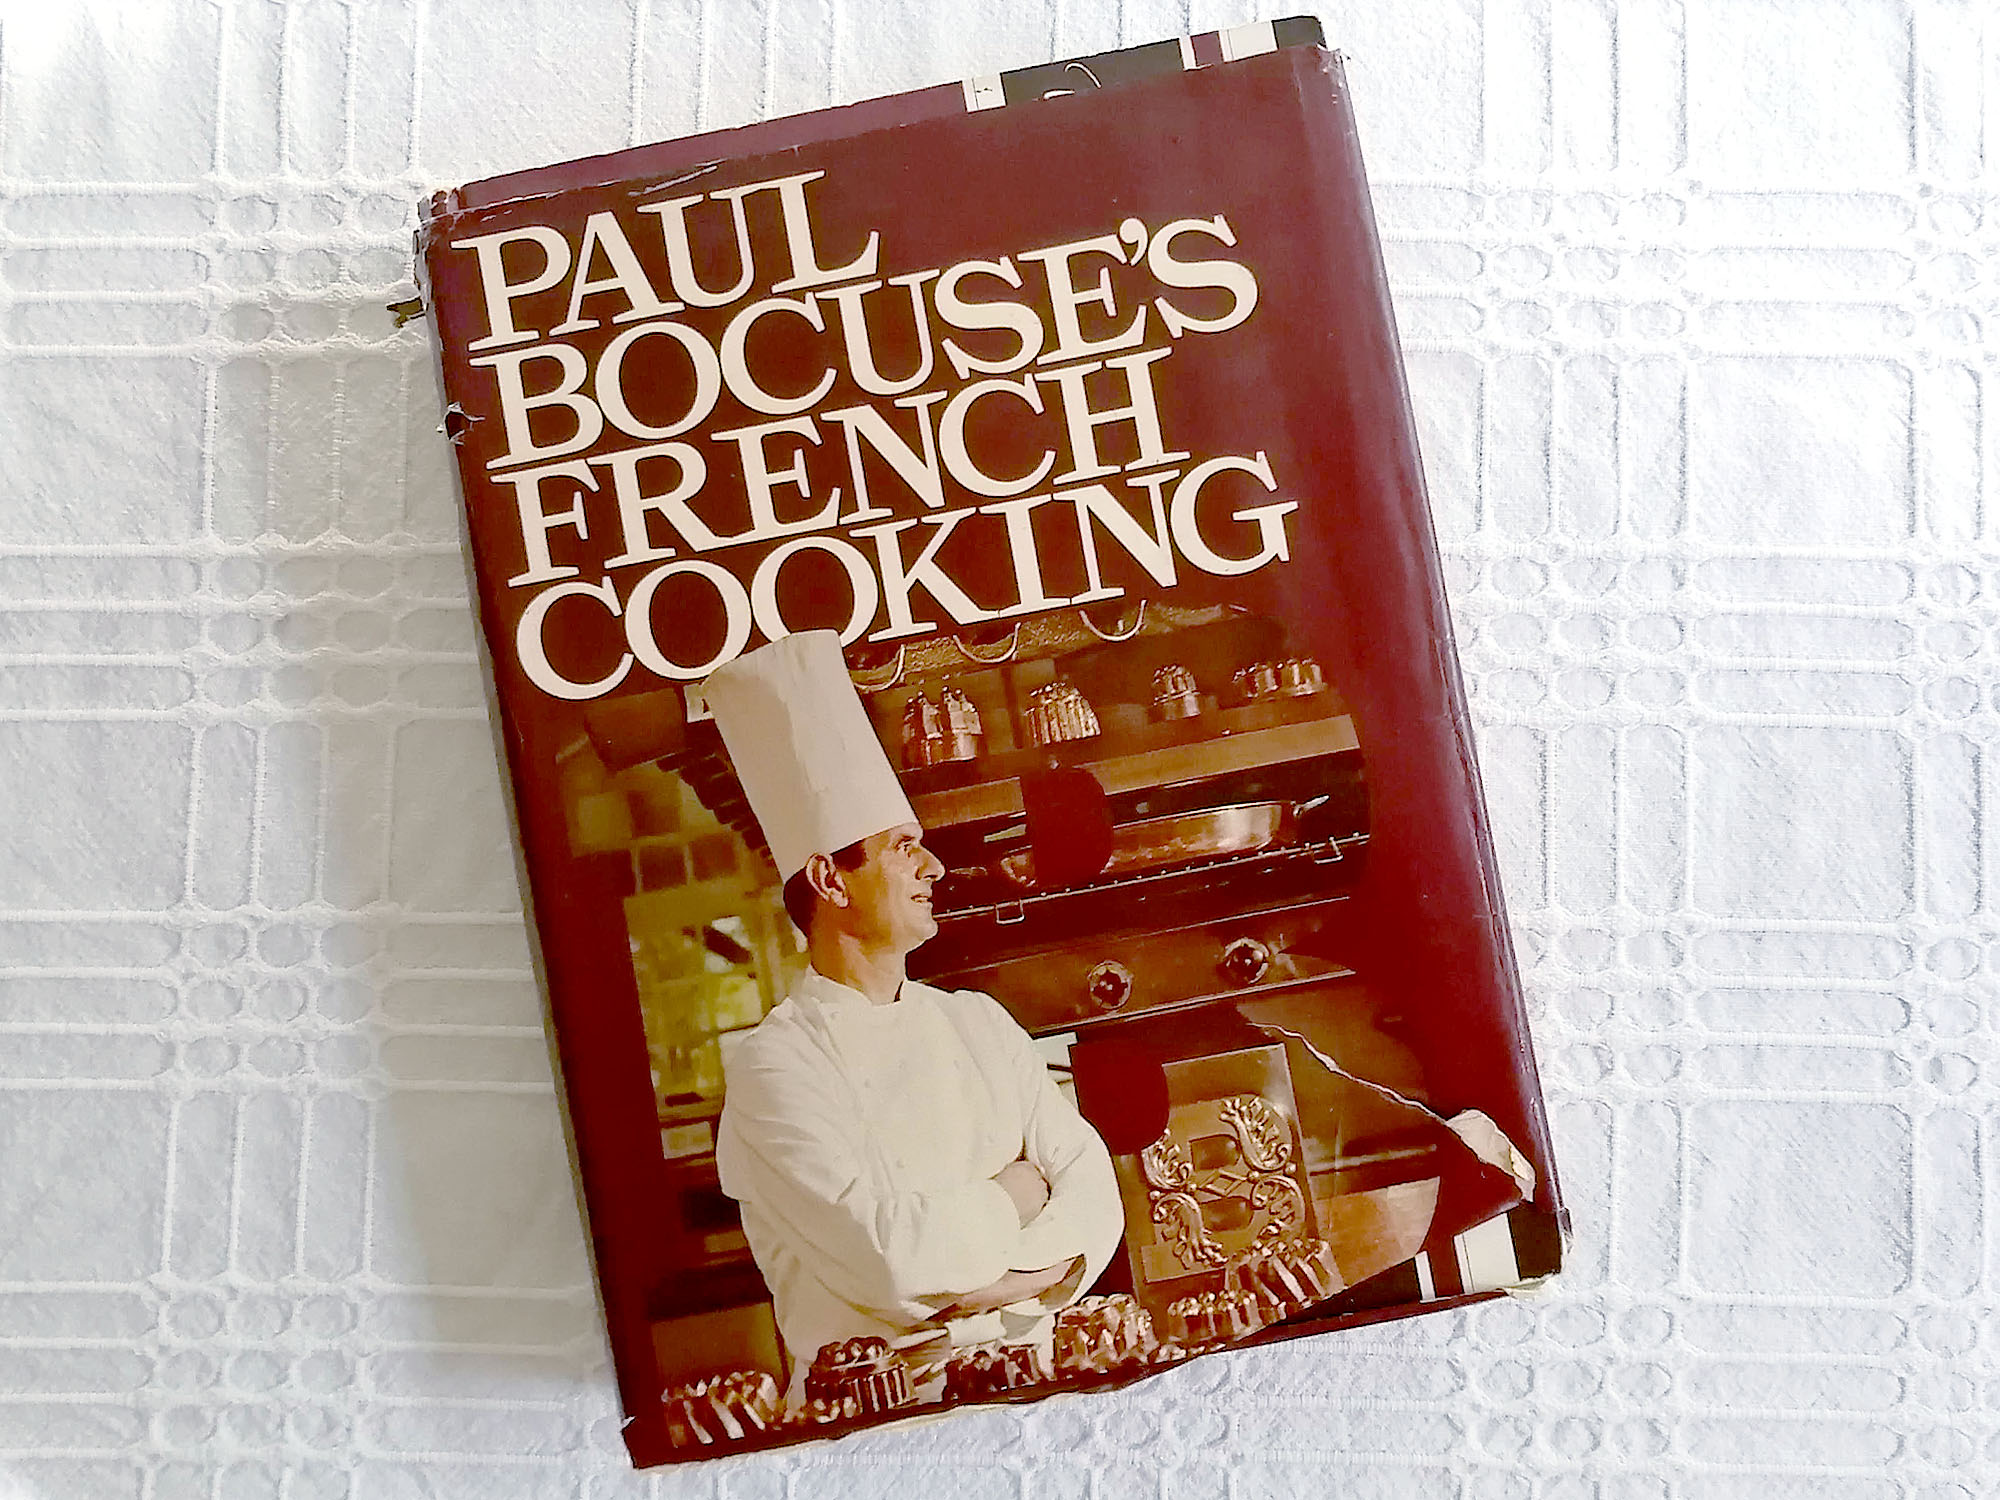 The cover of a used book titled â€œPaul Bocuseâ€™s French Cookingâ€ with torn cover. Photo by Paul Young.